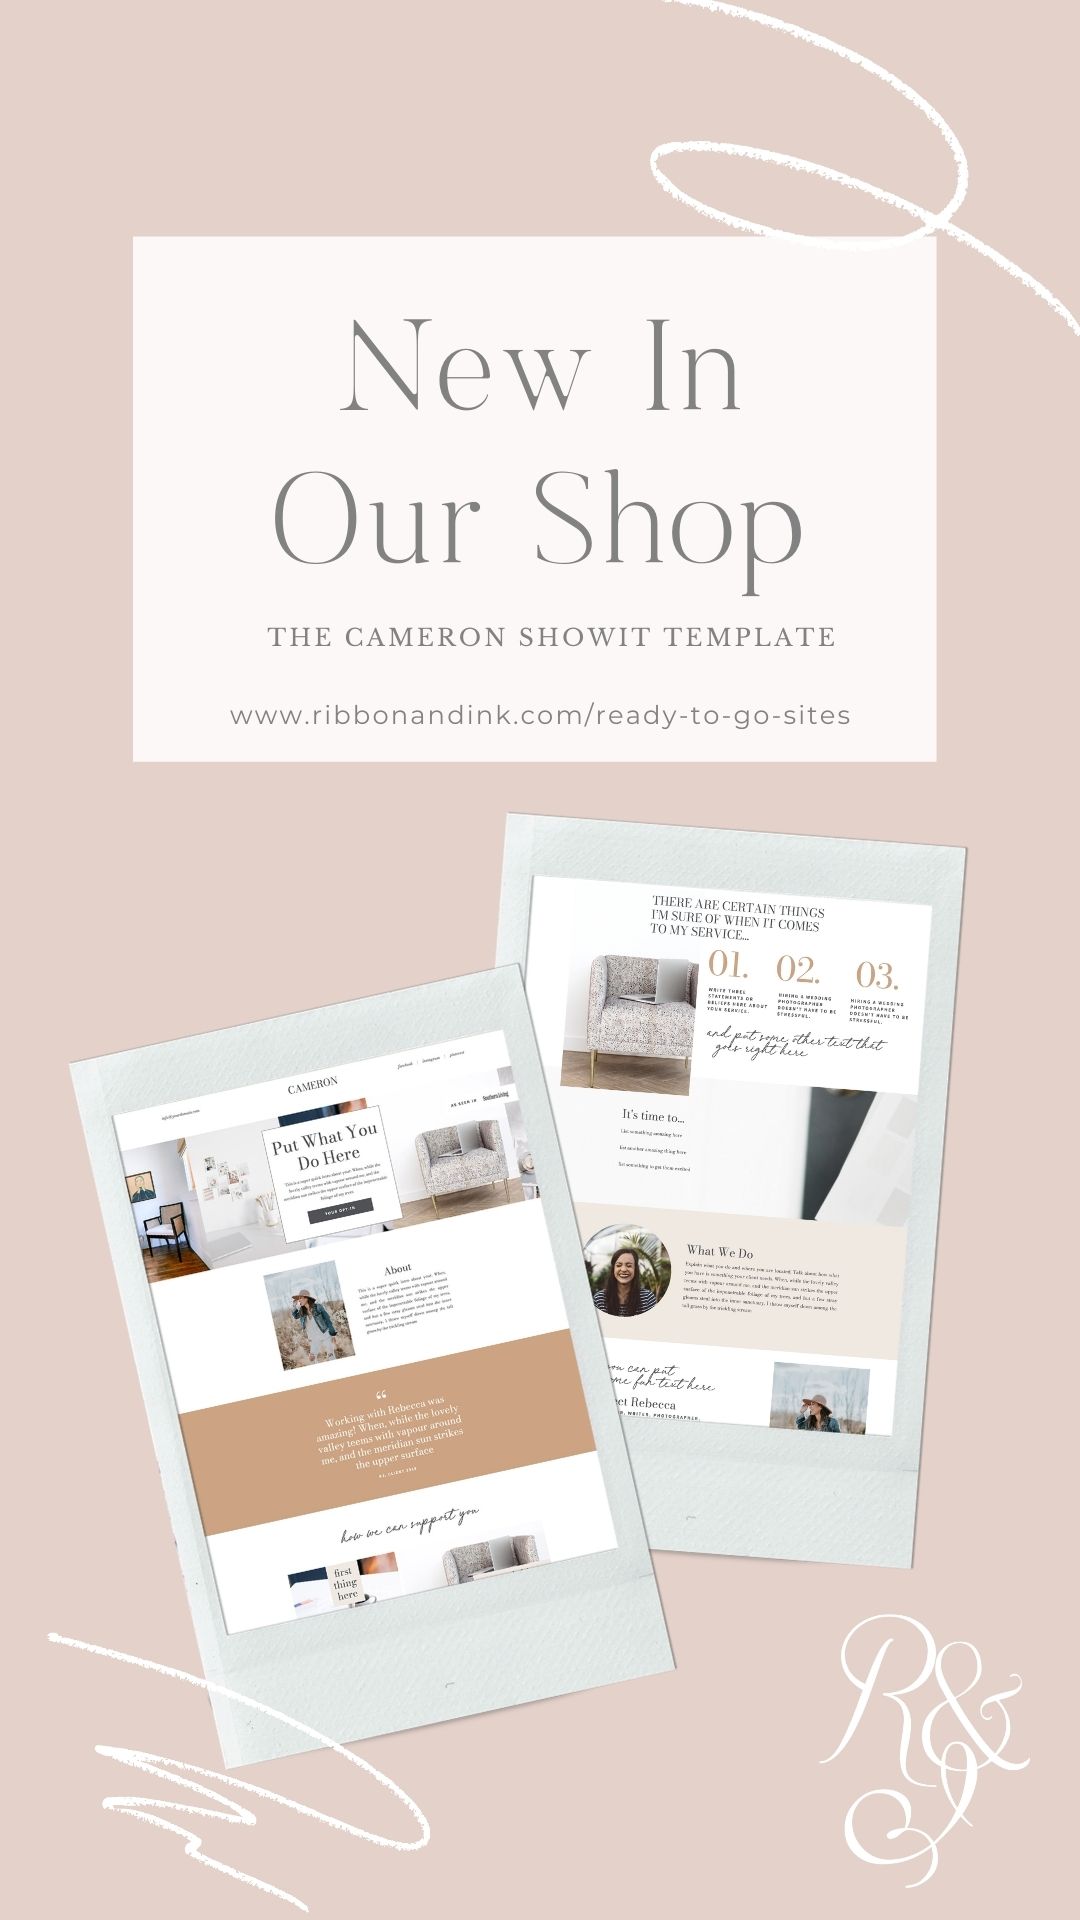 showit-website-template-for-small-businesses-drag-and-drop-interior-designers-photographers-planners-wedding-businesses-the-cameron